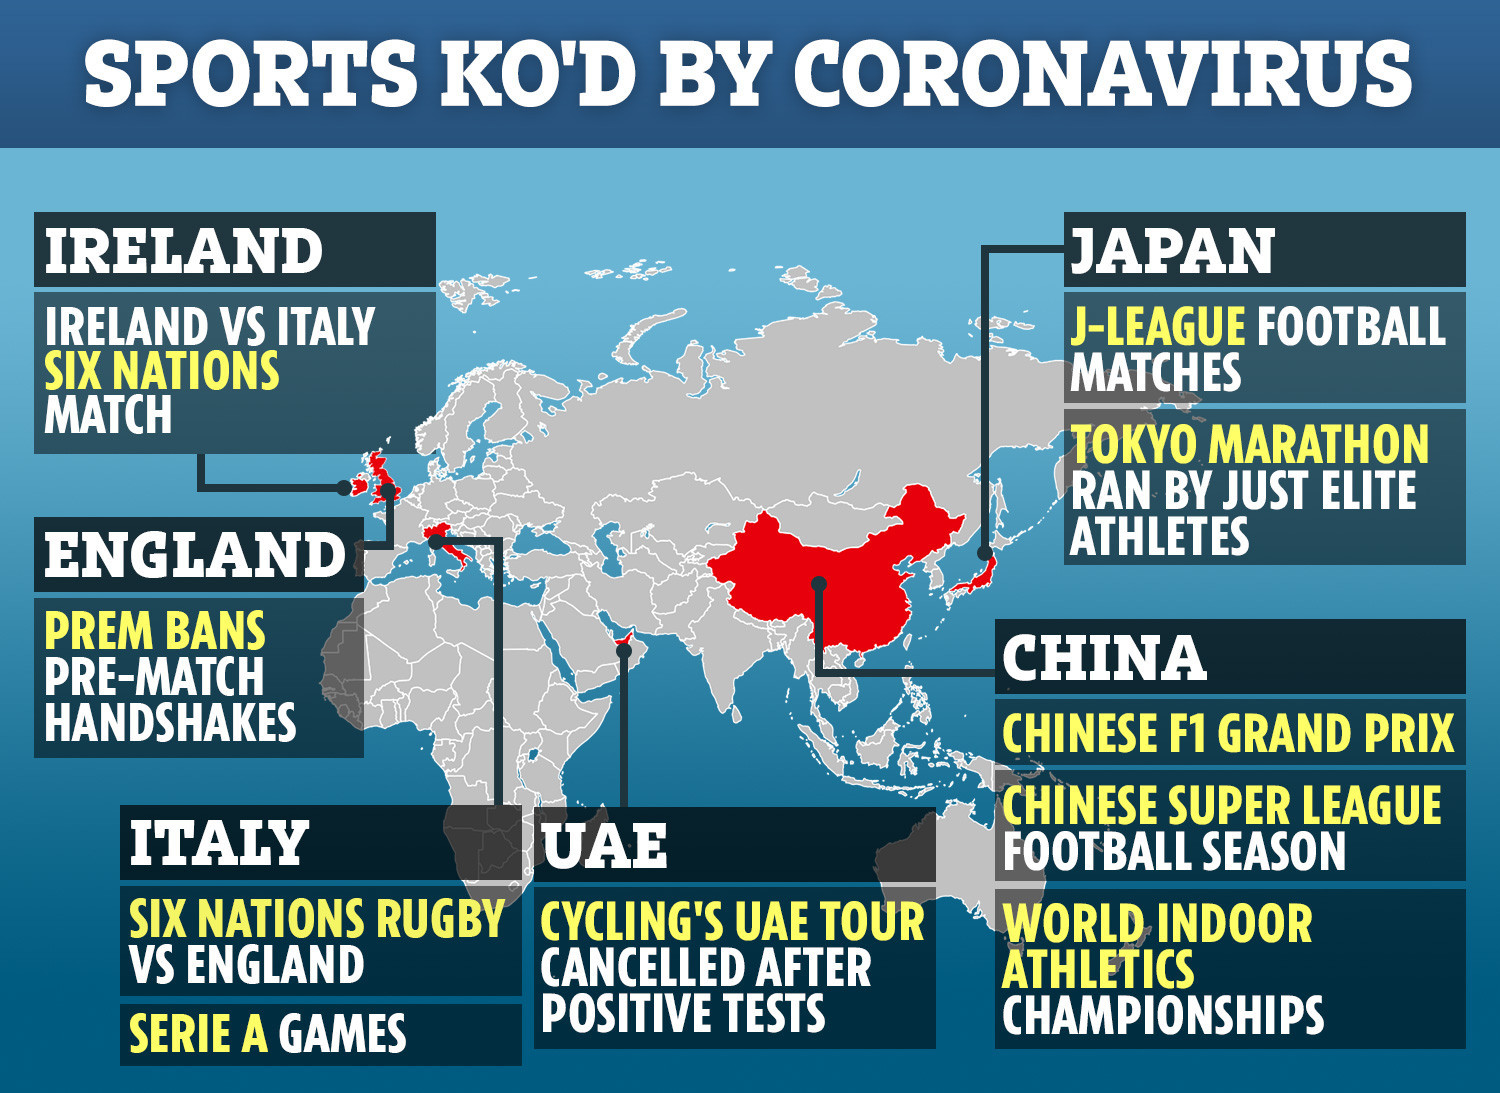 , Will the Indian Wells Masters be cancelled due to Coronavirus outbreak?